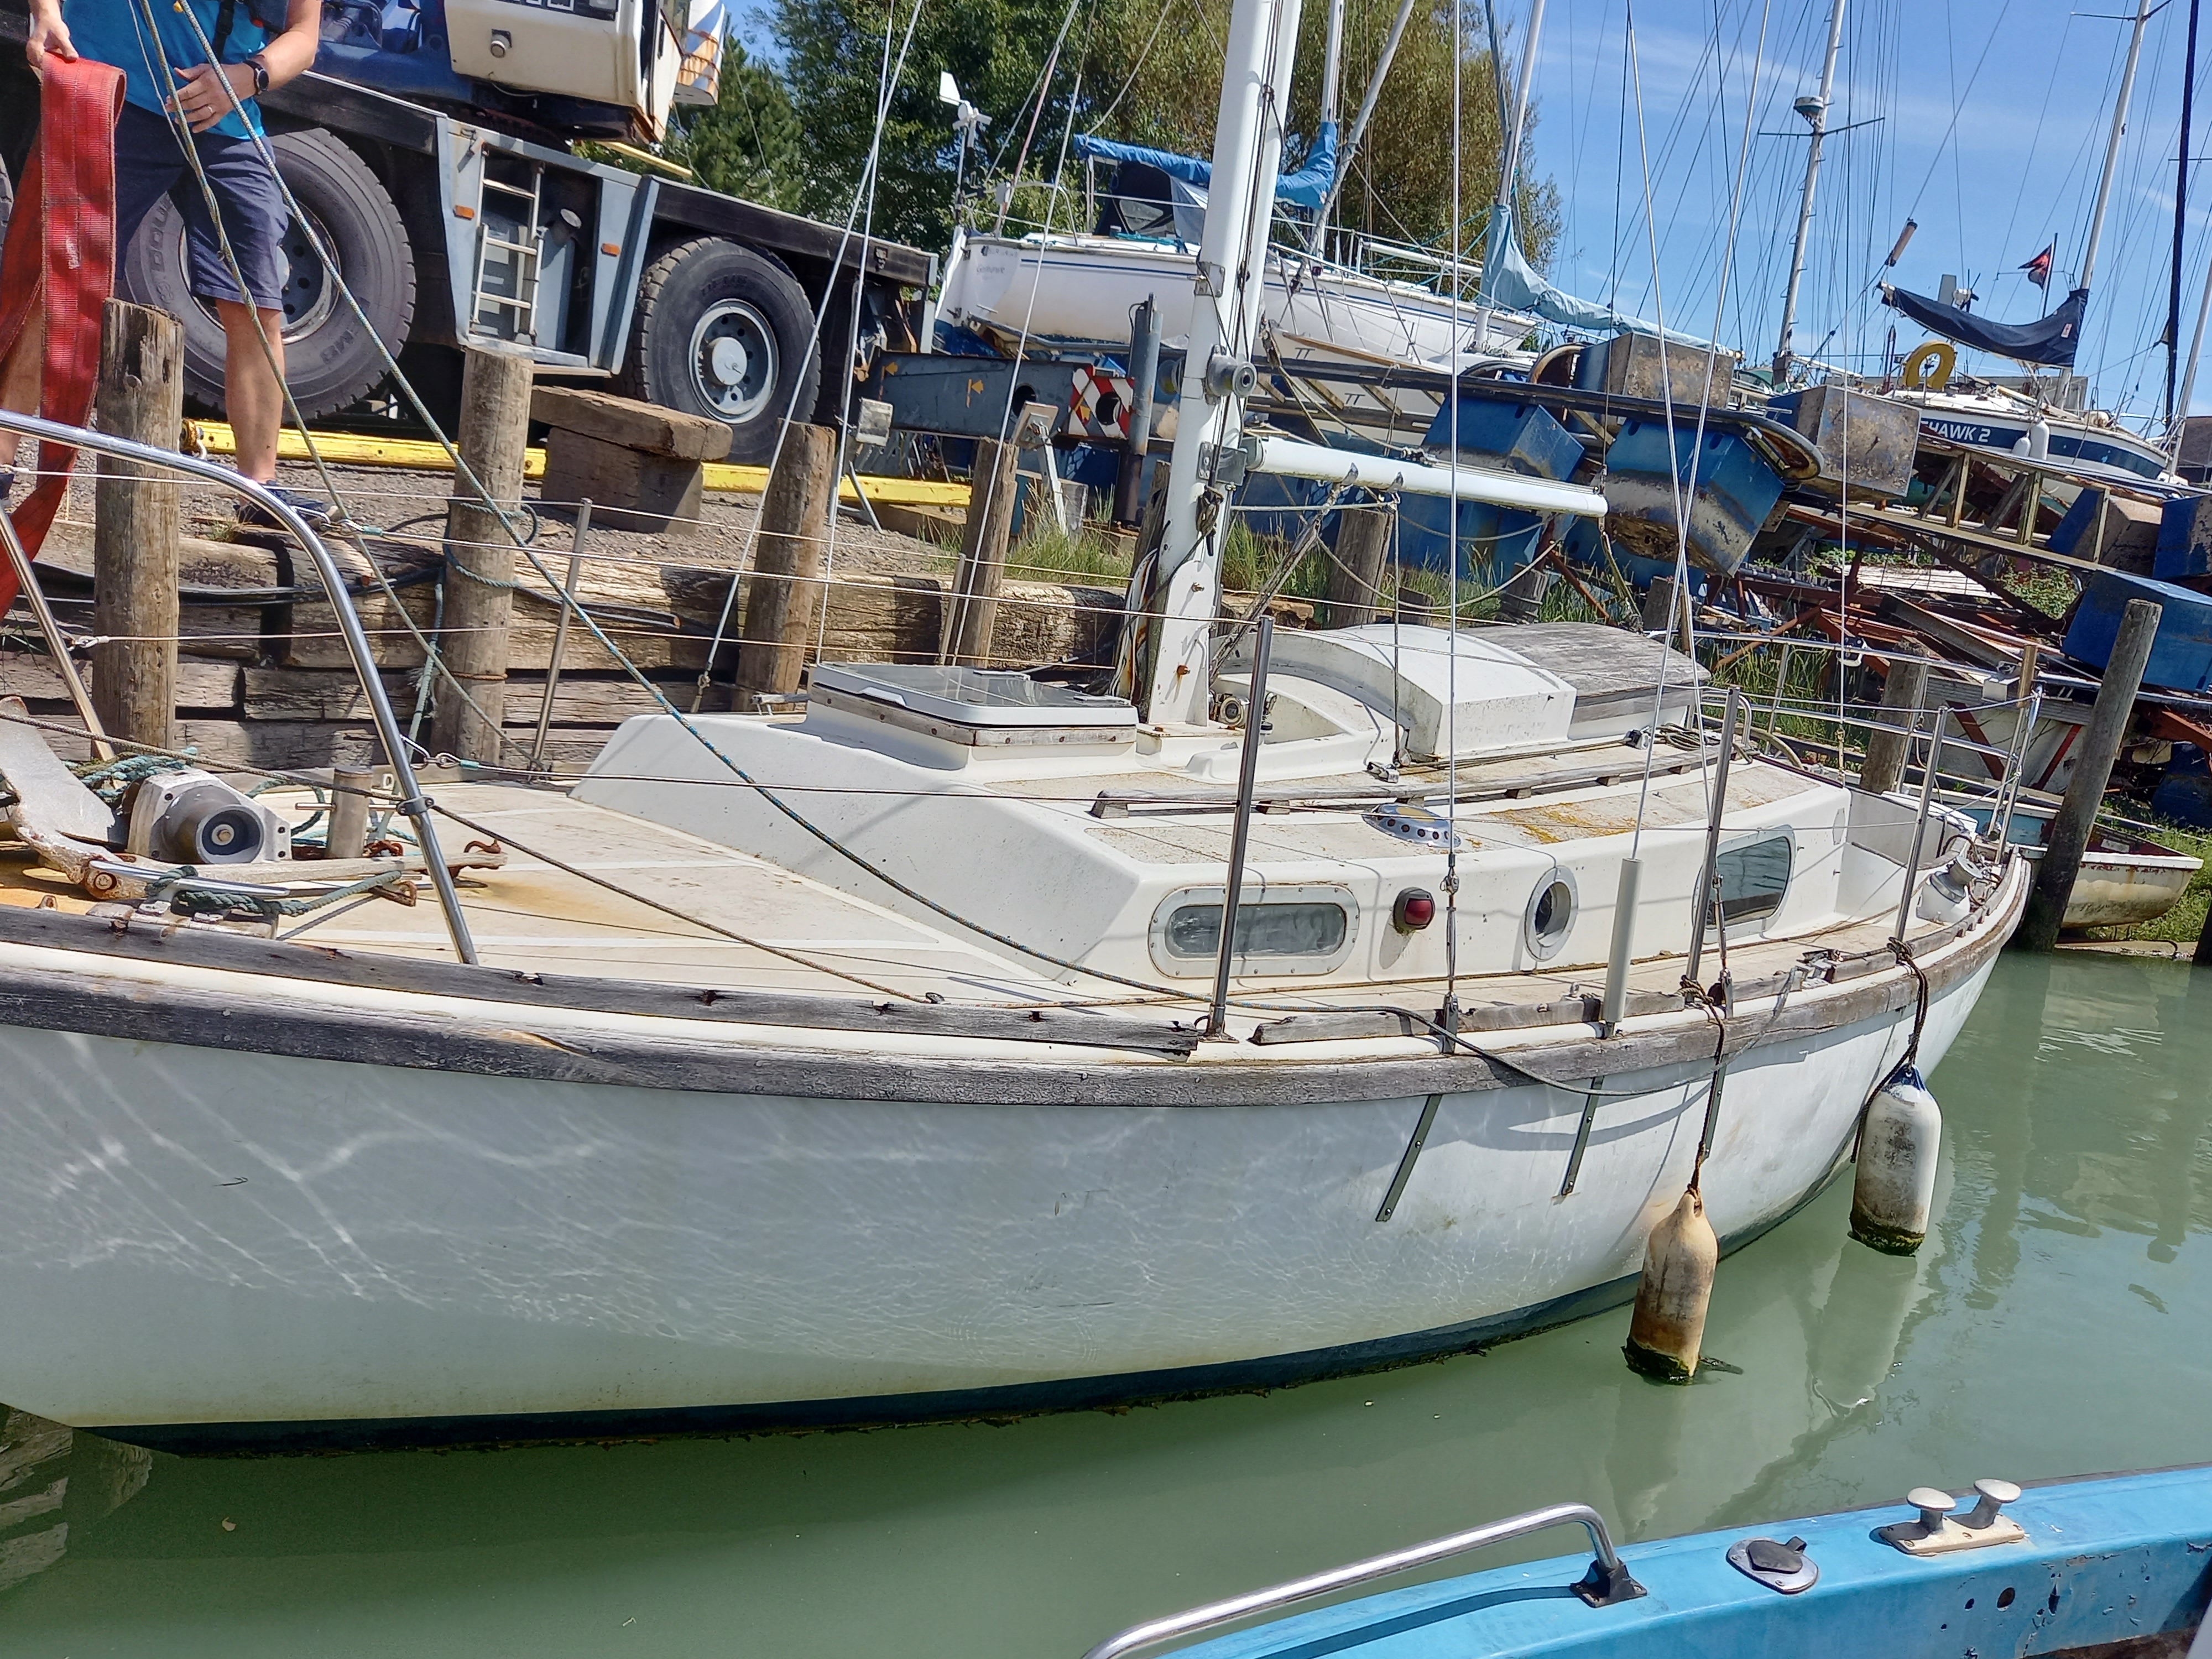 apollo duck sailing yachts for sale uk